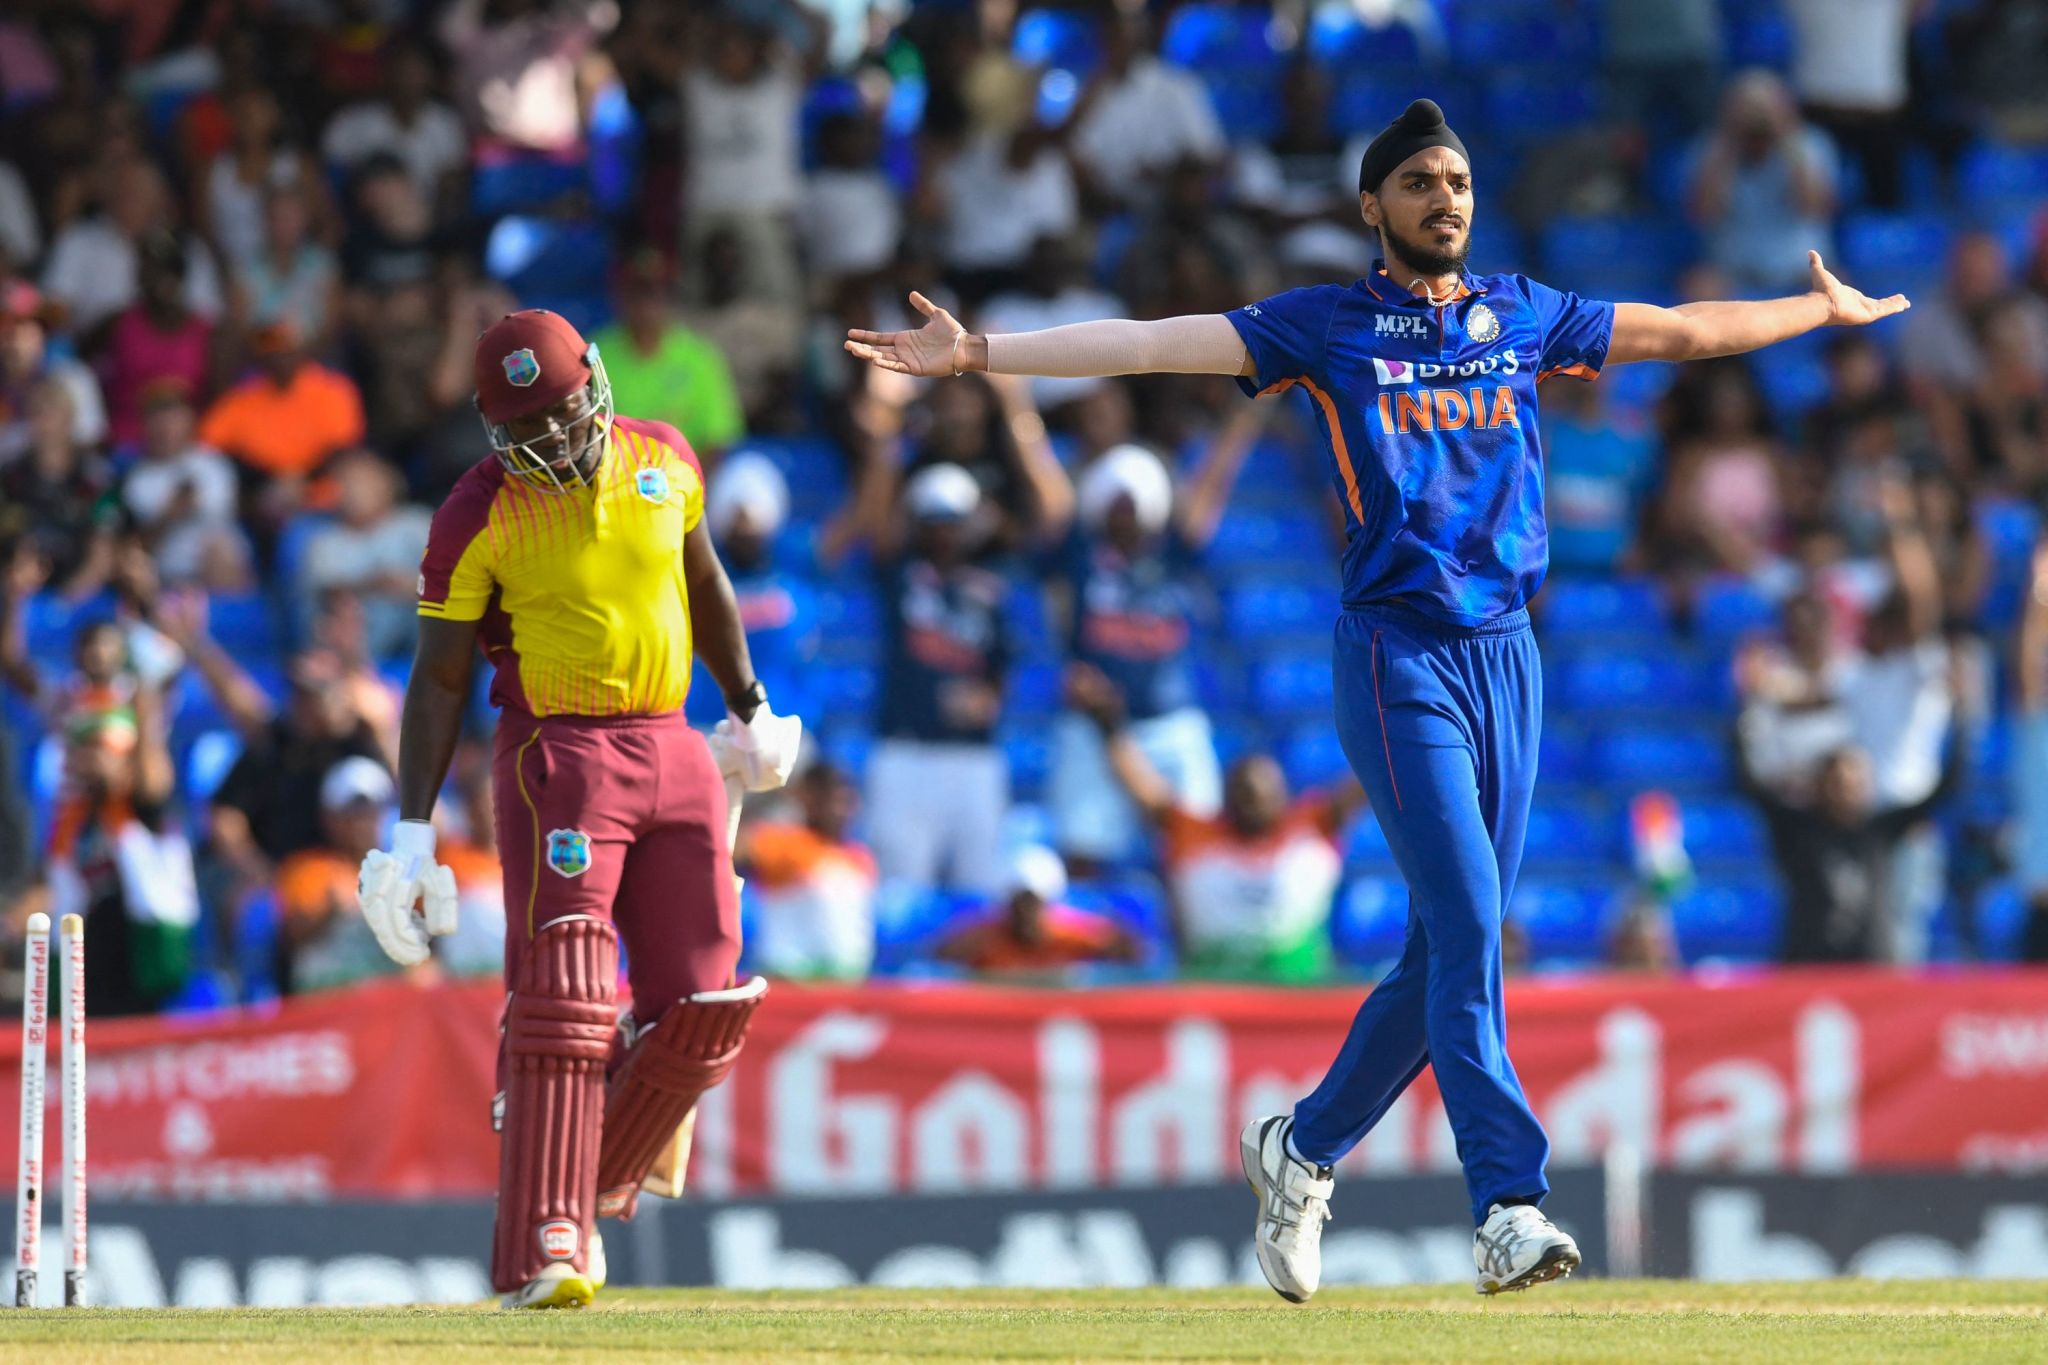 IND vs WI LIVE: Obed McCoy the HEROE as WI win by 5 wickets to level series 1-1: Check India vs WestIndies 2nd T20 Highlights, IND vs WI 2nd T20 Highlights